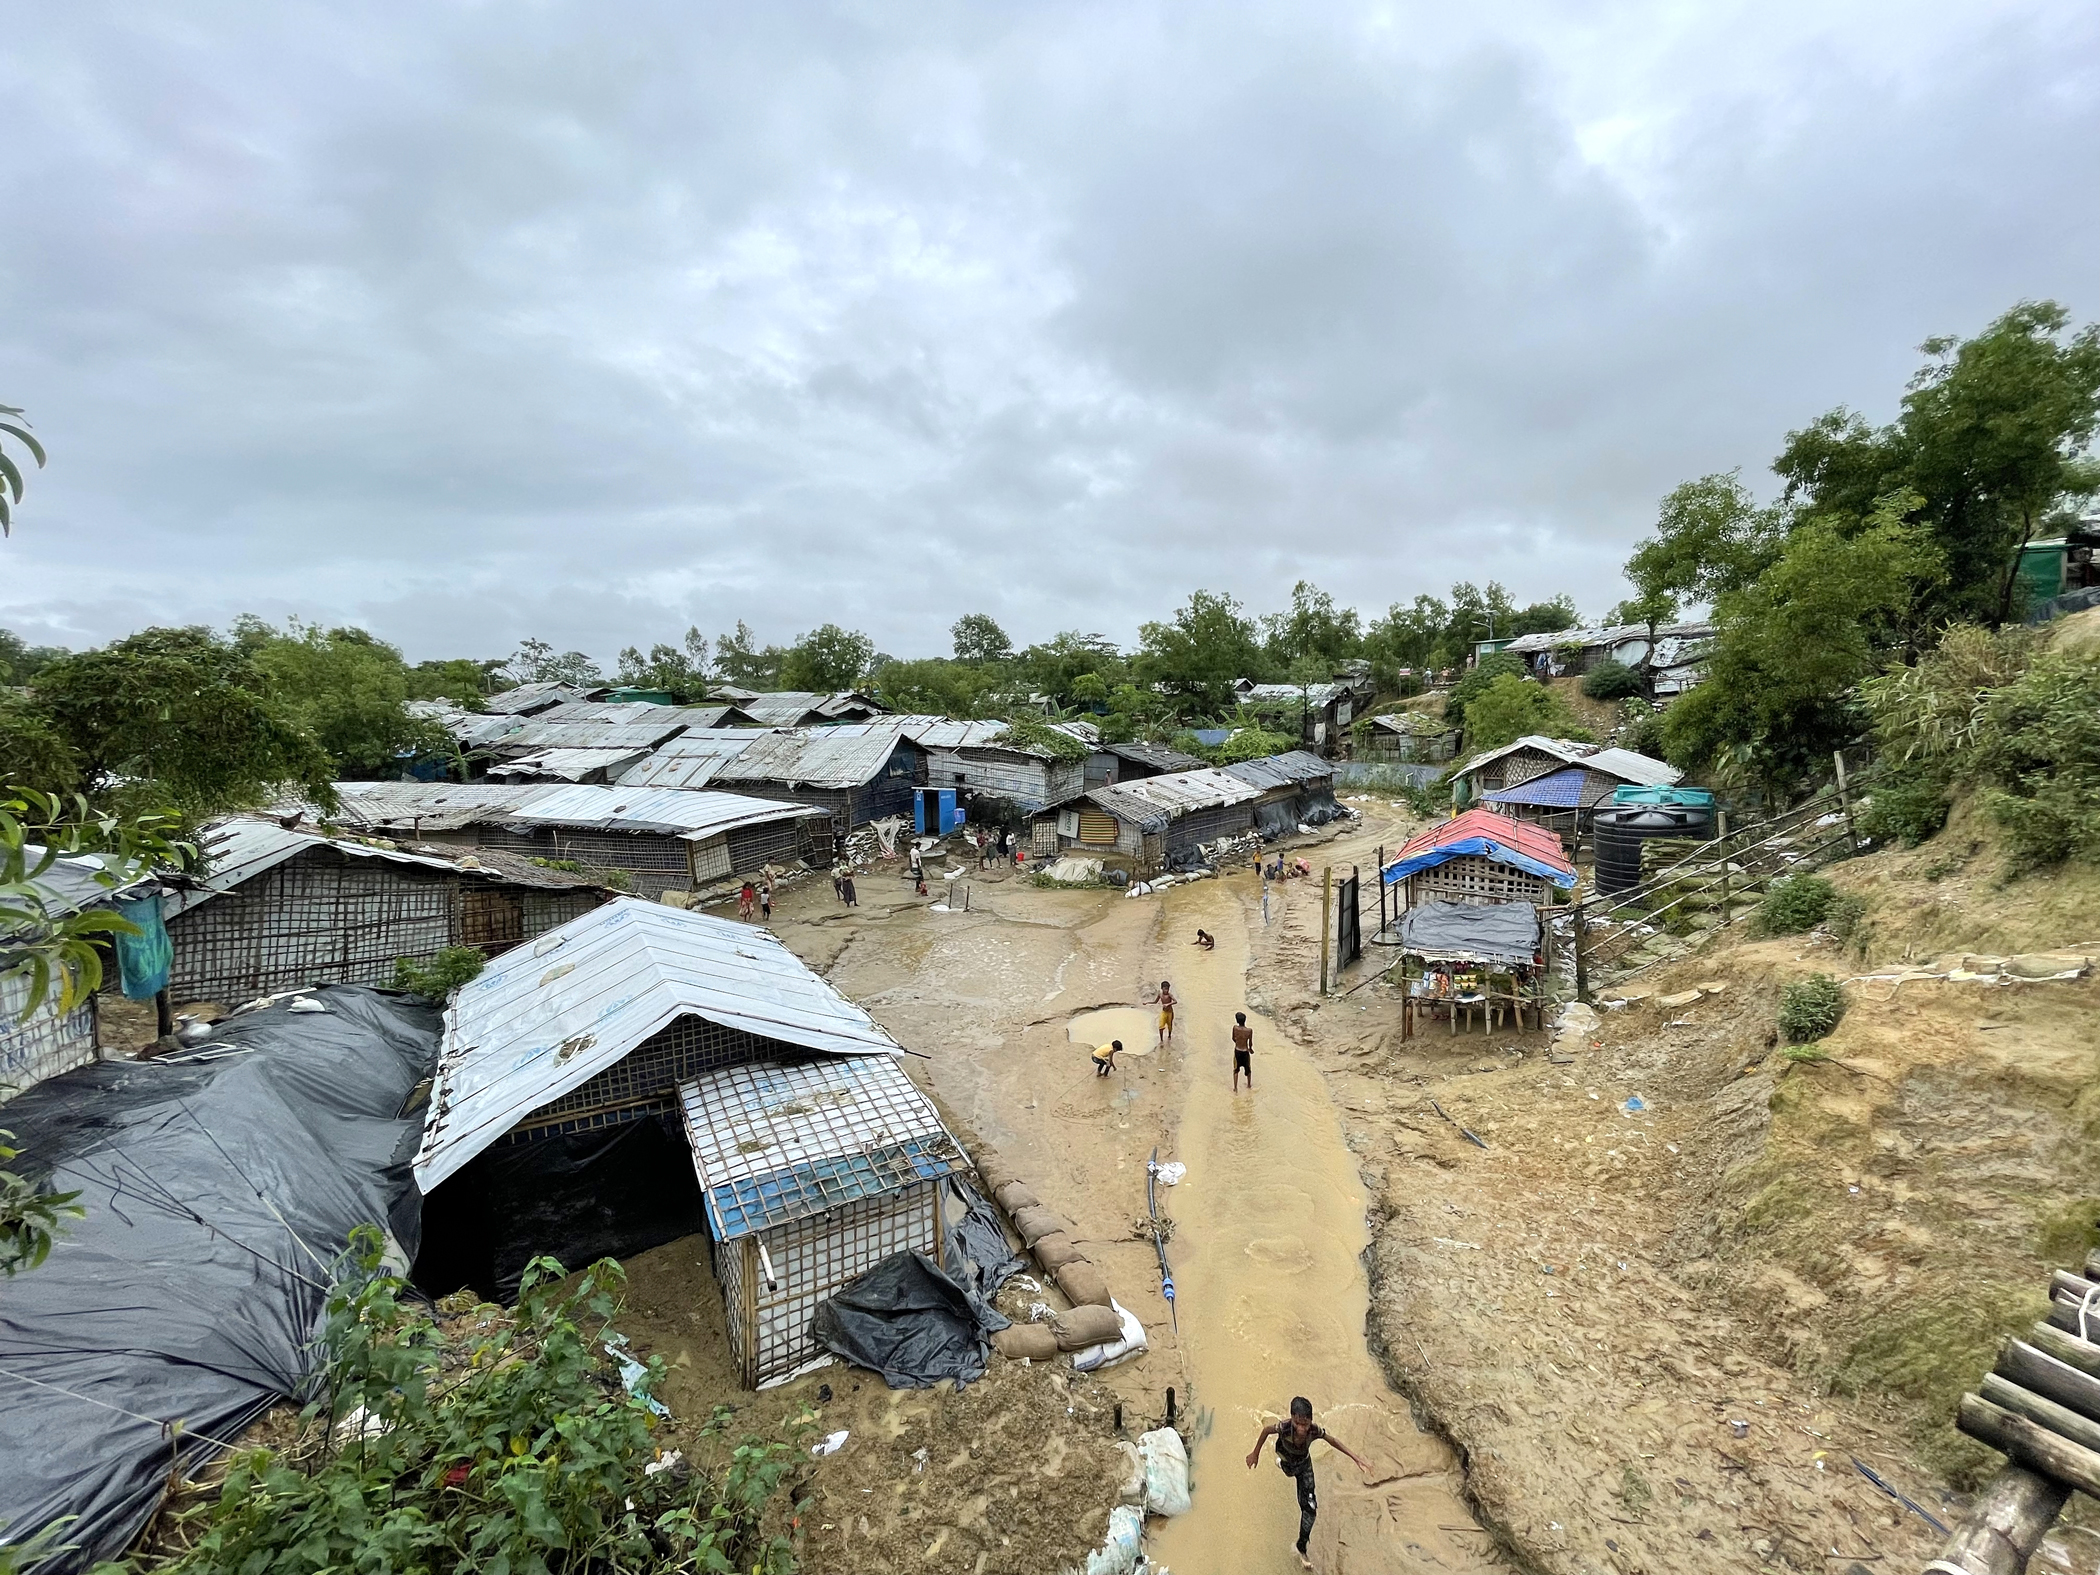 <p><sub>Rohingya refugee children play after the rain in Nayapara refugee camp in Teknaf, eastern Bangladesh. Heavy monsoon rains and strong winds caused flash floods and landslides in Rohingya refugee sites in Cox’s Bazar in July 2021.</sub></p>